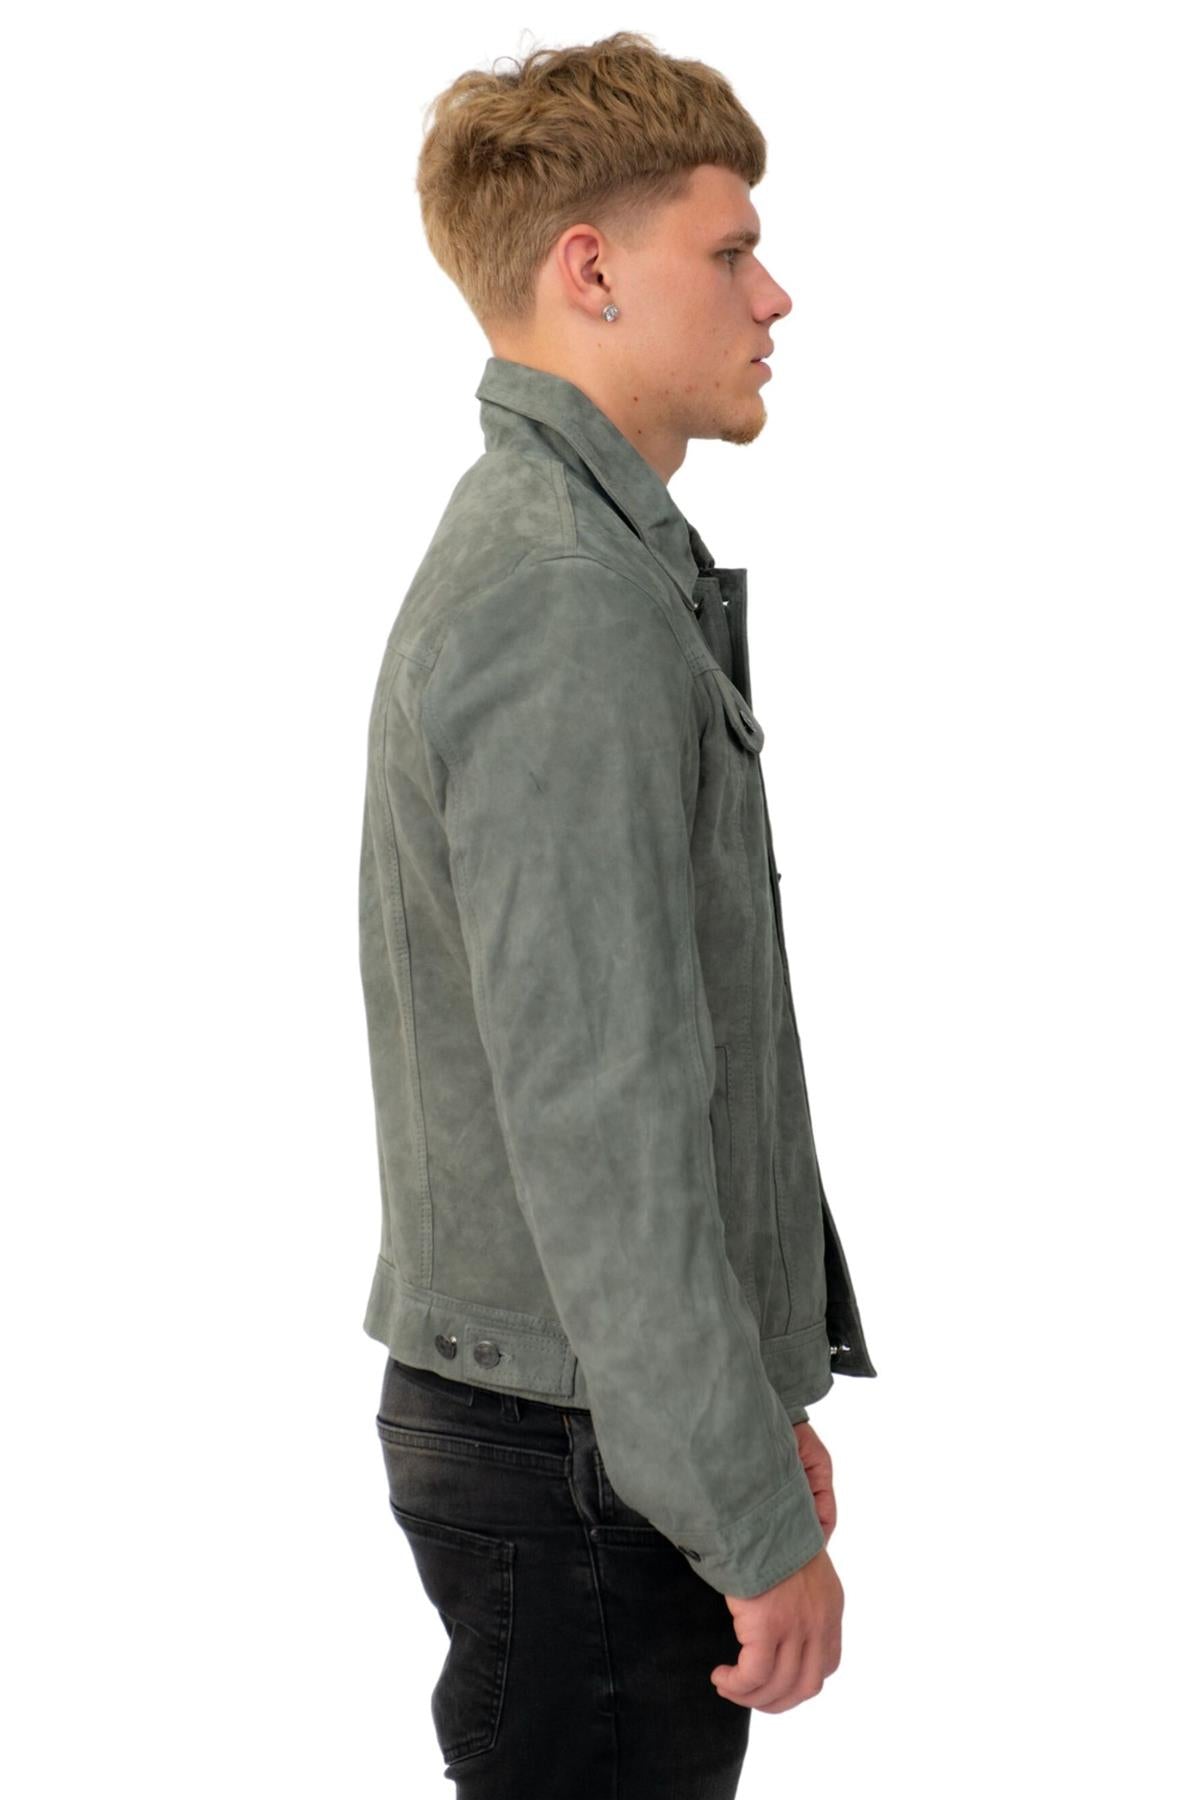 Mens Goat Suede Leather Jeans Jacket-Adelaide